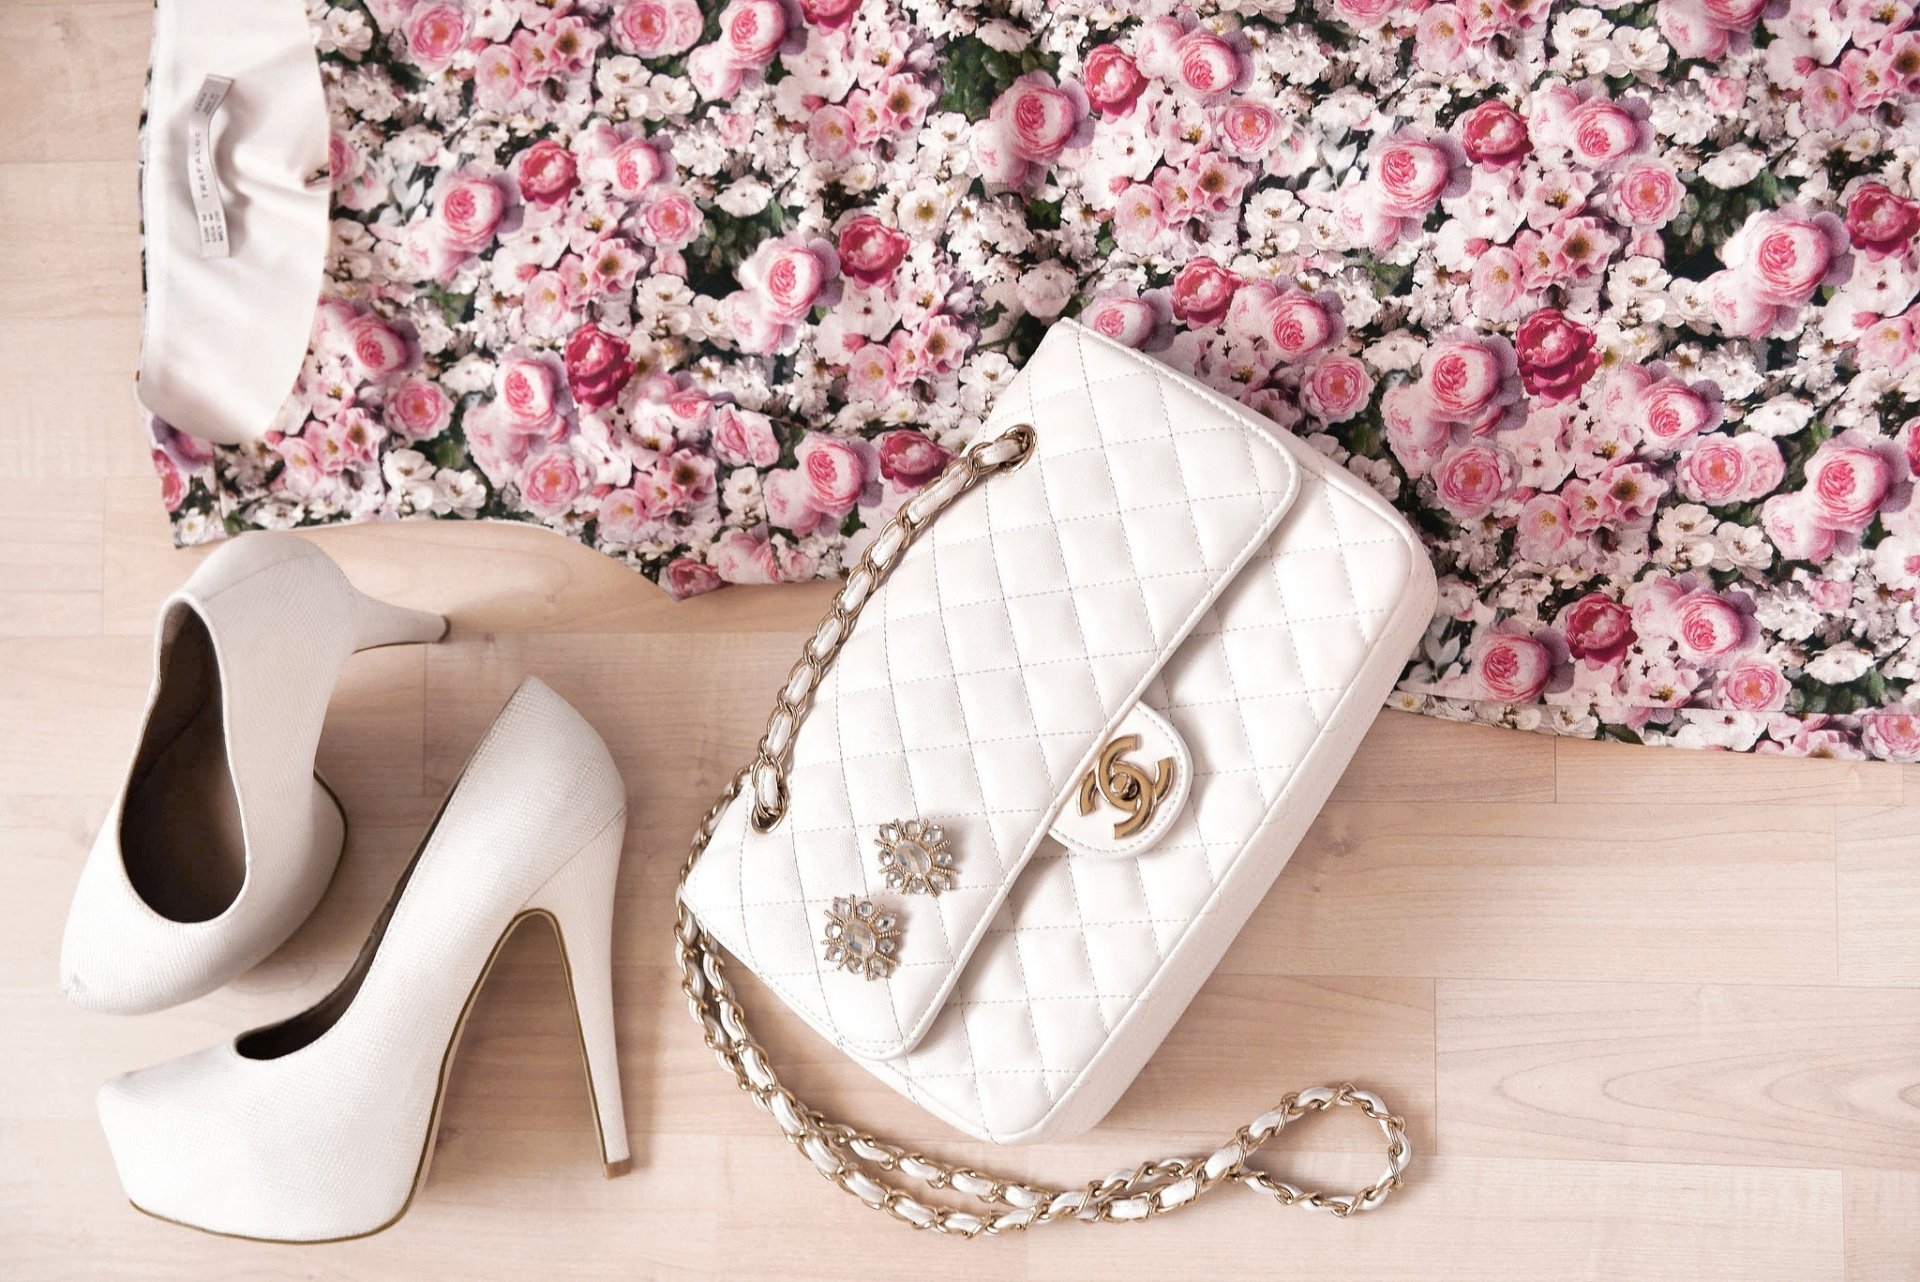 Dress Flower Roses Shoes White Bag Chanel Clothing Women Style HD